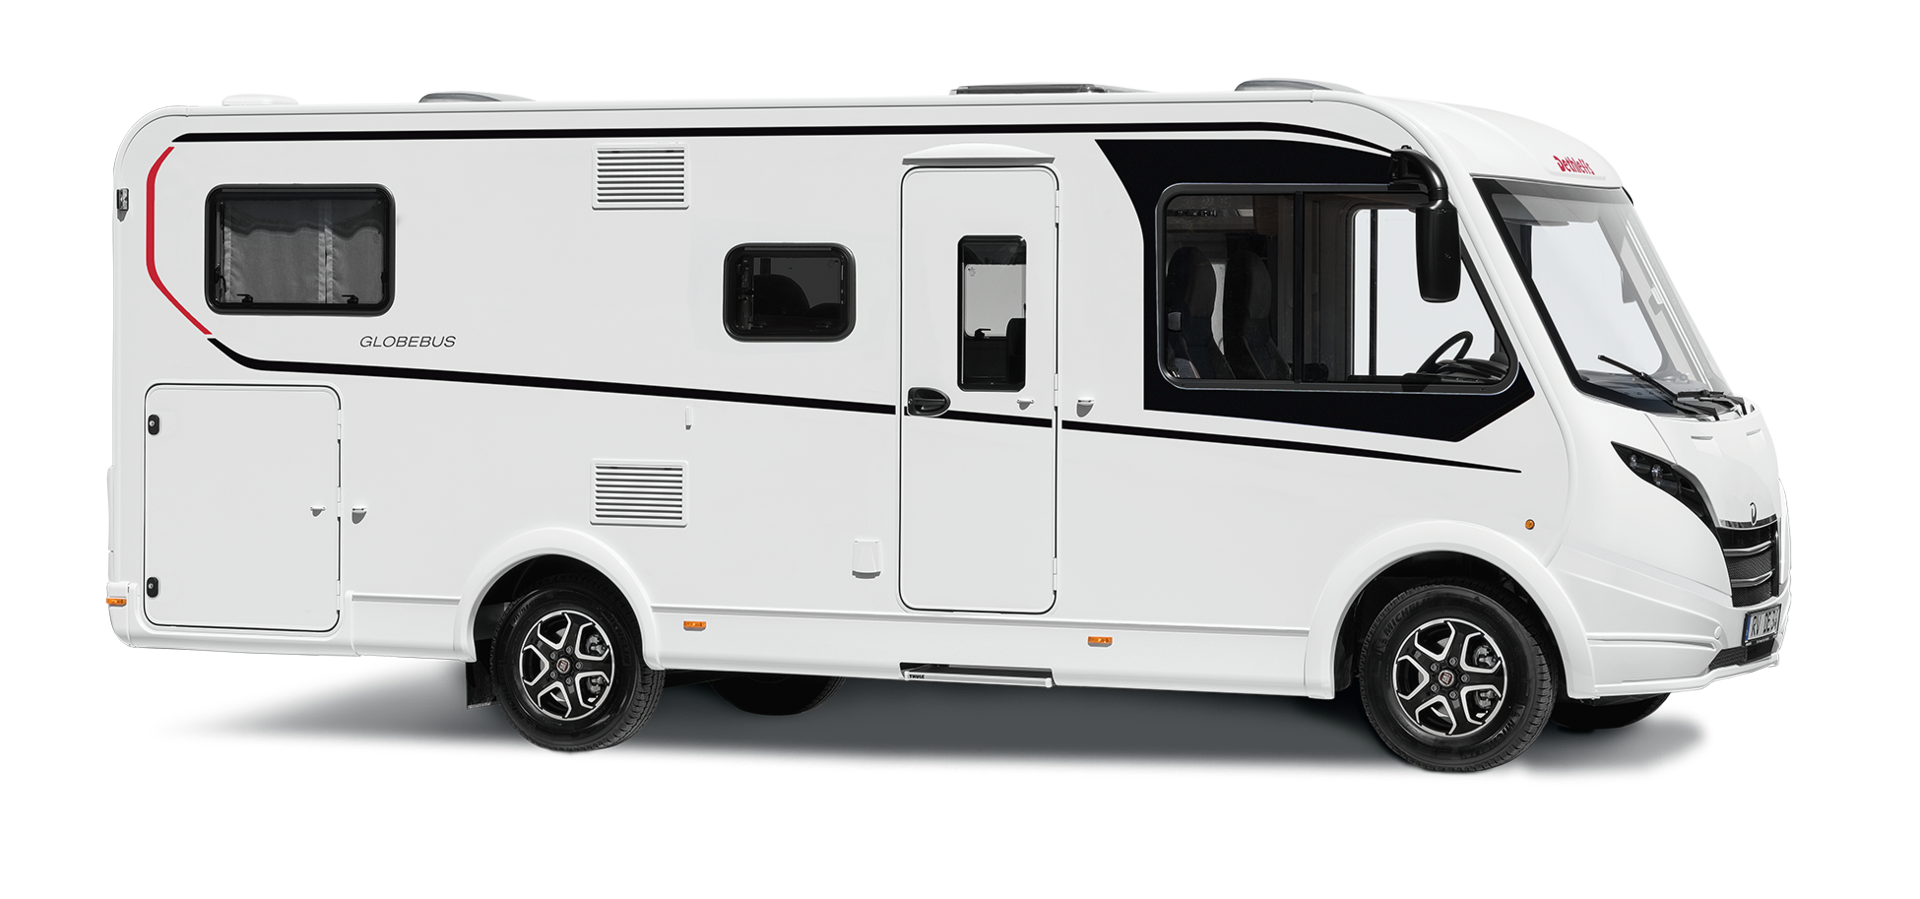 Motorhome royalty in a compact format!